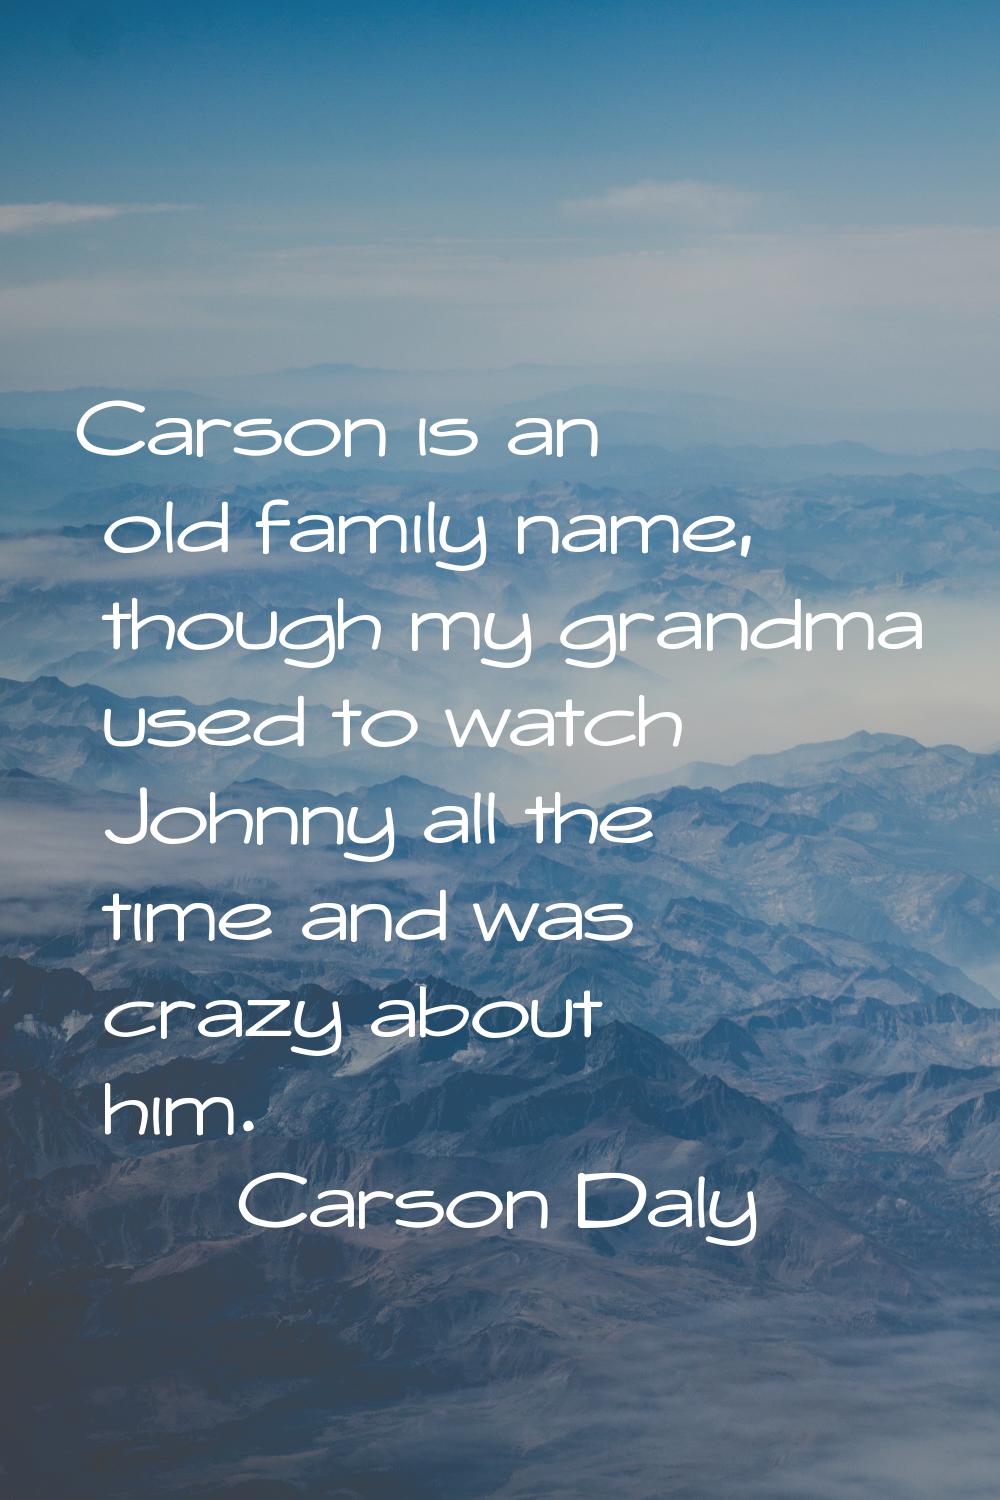 Carson is an old family name, though my grandma used to watch Johnny all the time and was crazy abo